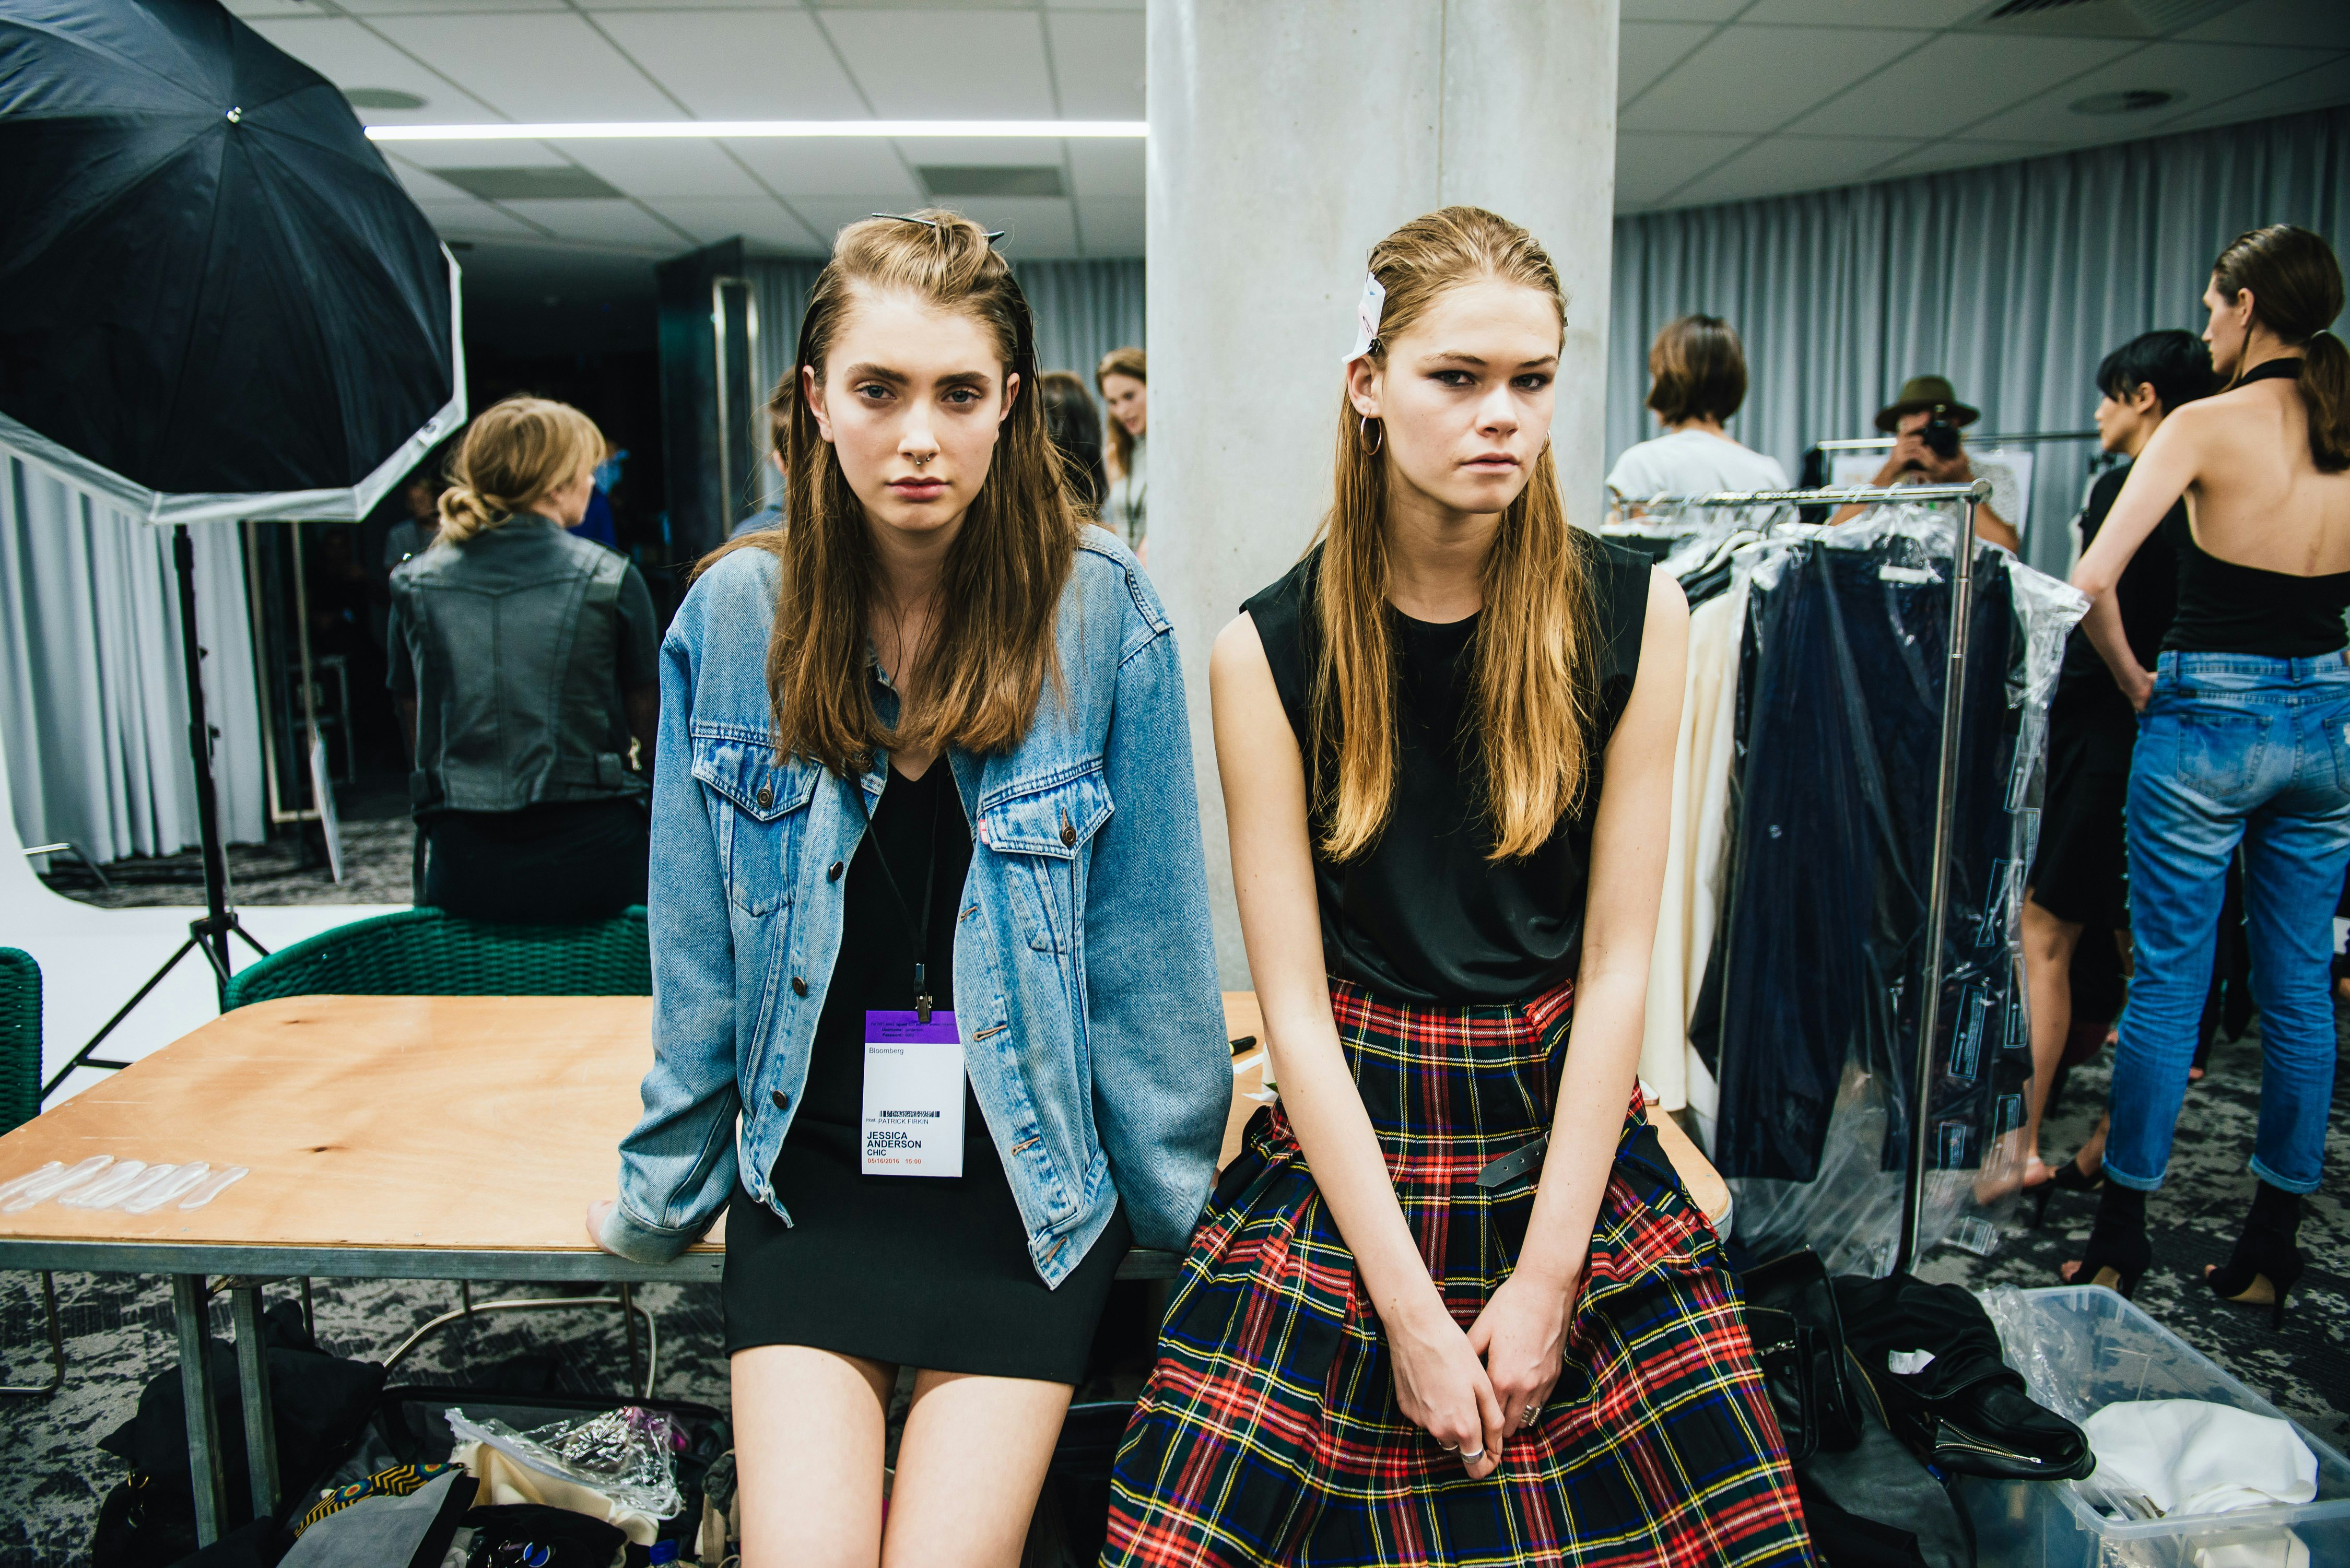 Each year Flaunter.com shoots images on the streets and behind the scenes at Mercedes Benz Fashion Week Australia. This image was taken backstage at Dion Lee in 2016. 

*Flaunter.com is a platform that makes it easy for Brands and PR’s to share & track their content with the best Media, Stylists, Bloggers and Freelancers. Email hello@flaunter.com to sign up.